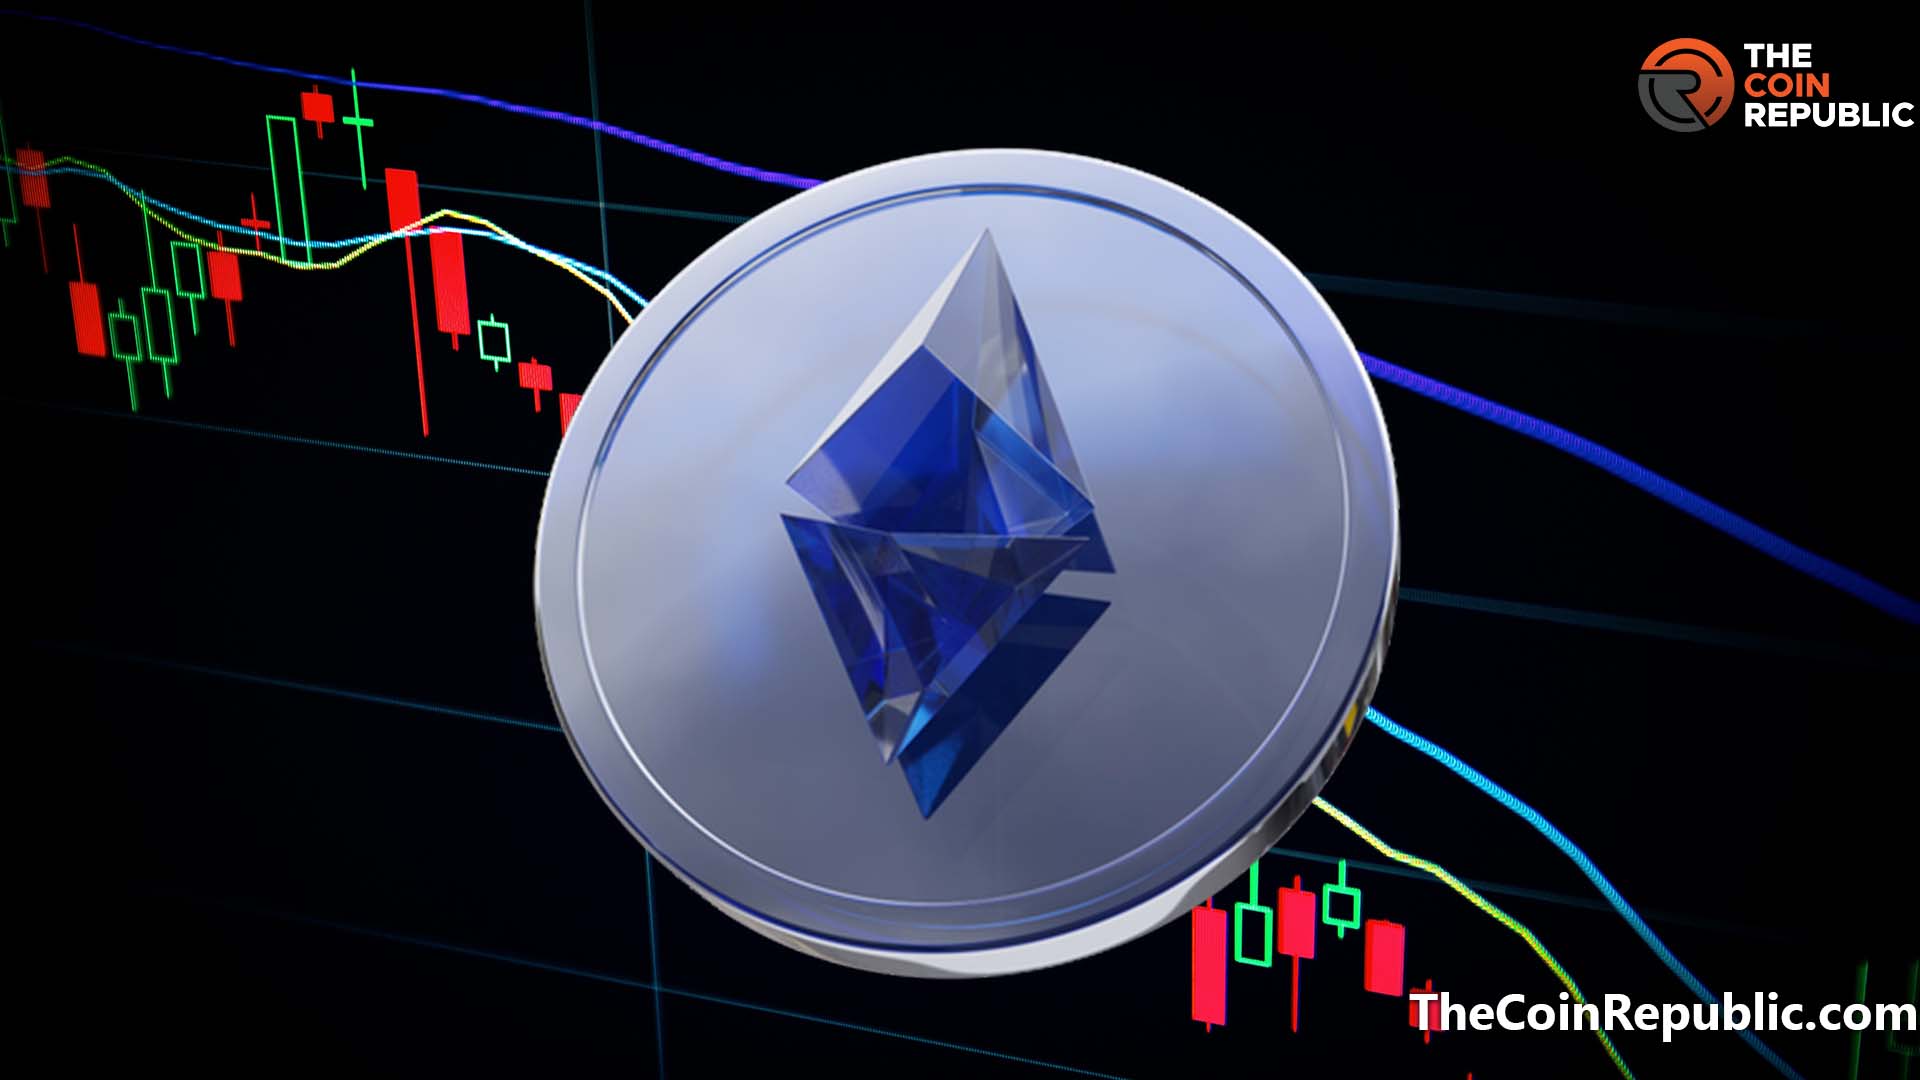 EthereumPOW (ETHW) Price Prediction : ETHW price surged 7% overnight, Is the up move fake or real ?